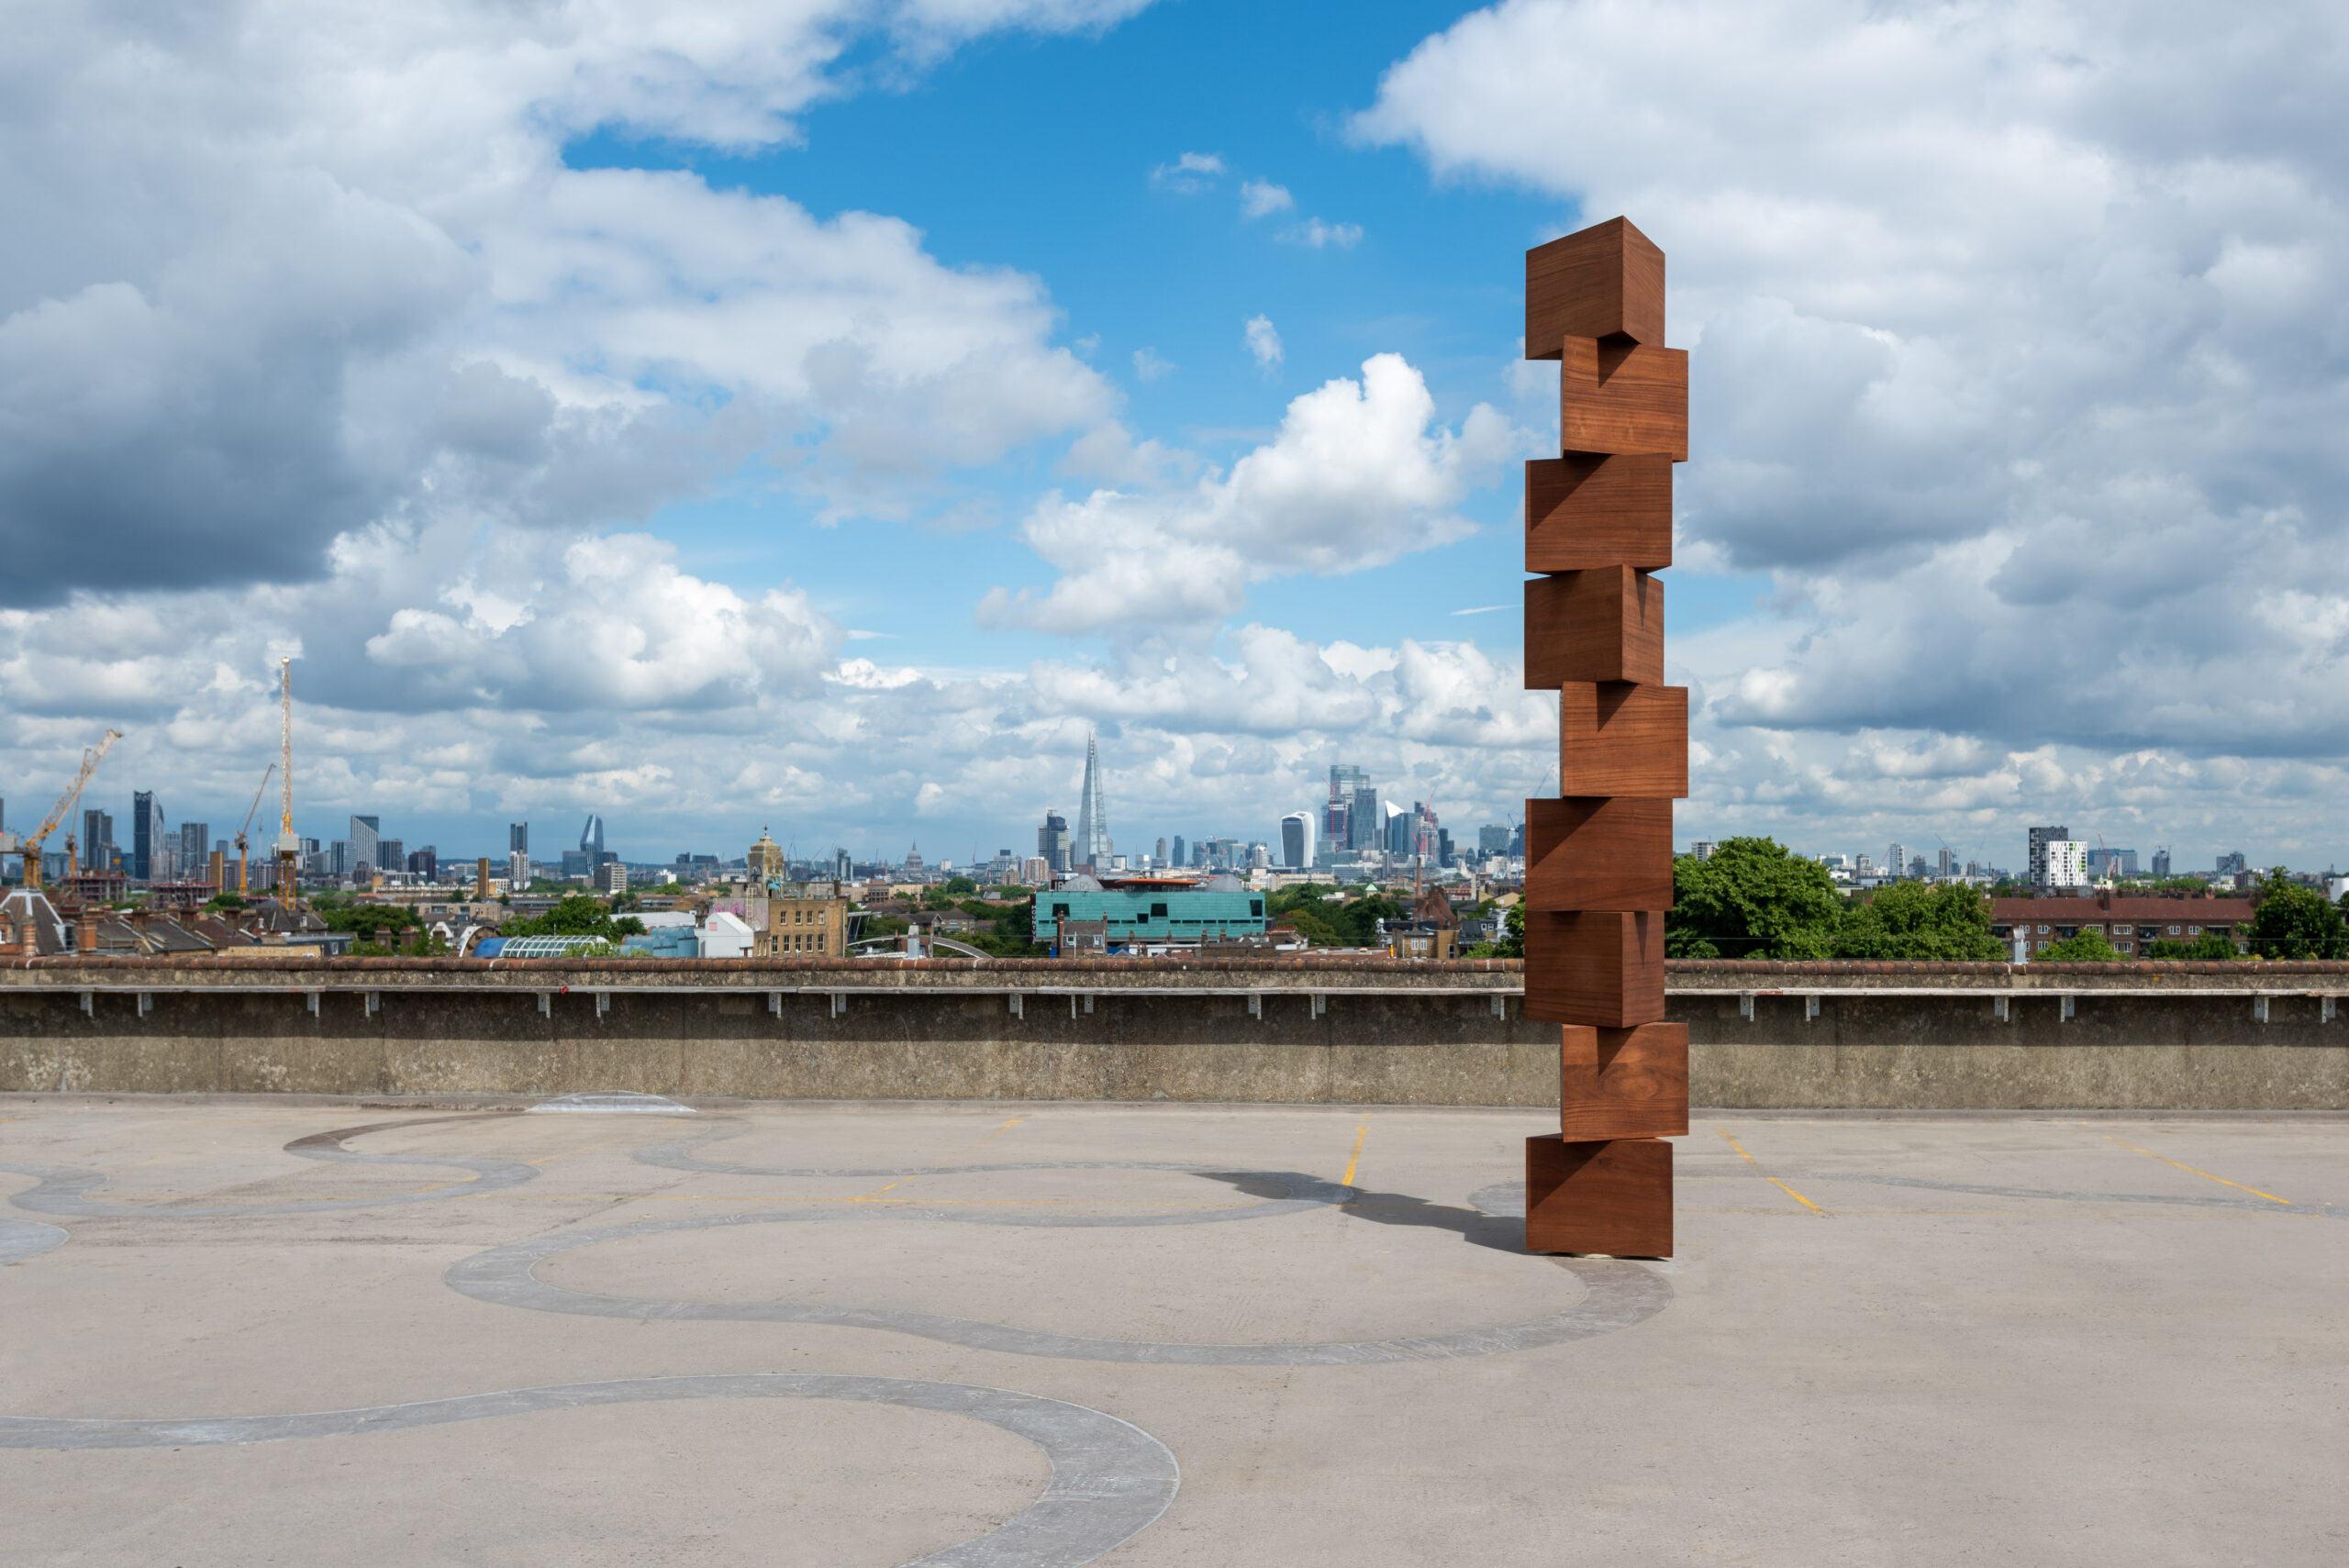 ID: a large wooden obelisk is made from nine rotating triangular prisms stacked on top of one another and rotating to create a bird’s eye view of a nine-pointed star. The sculpture measures over 4.5 metres in height and is made from African Mahogany. It is placed on a concrete rooftop with the London skyline and clear blue skies in the background.